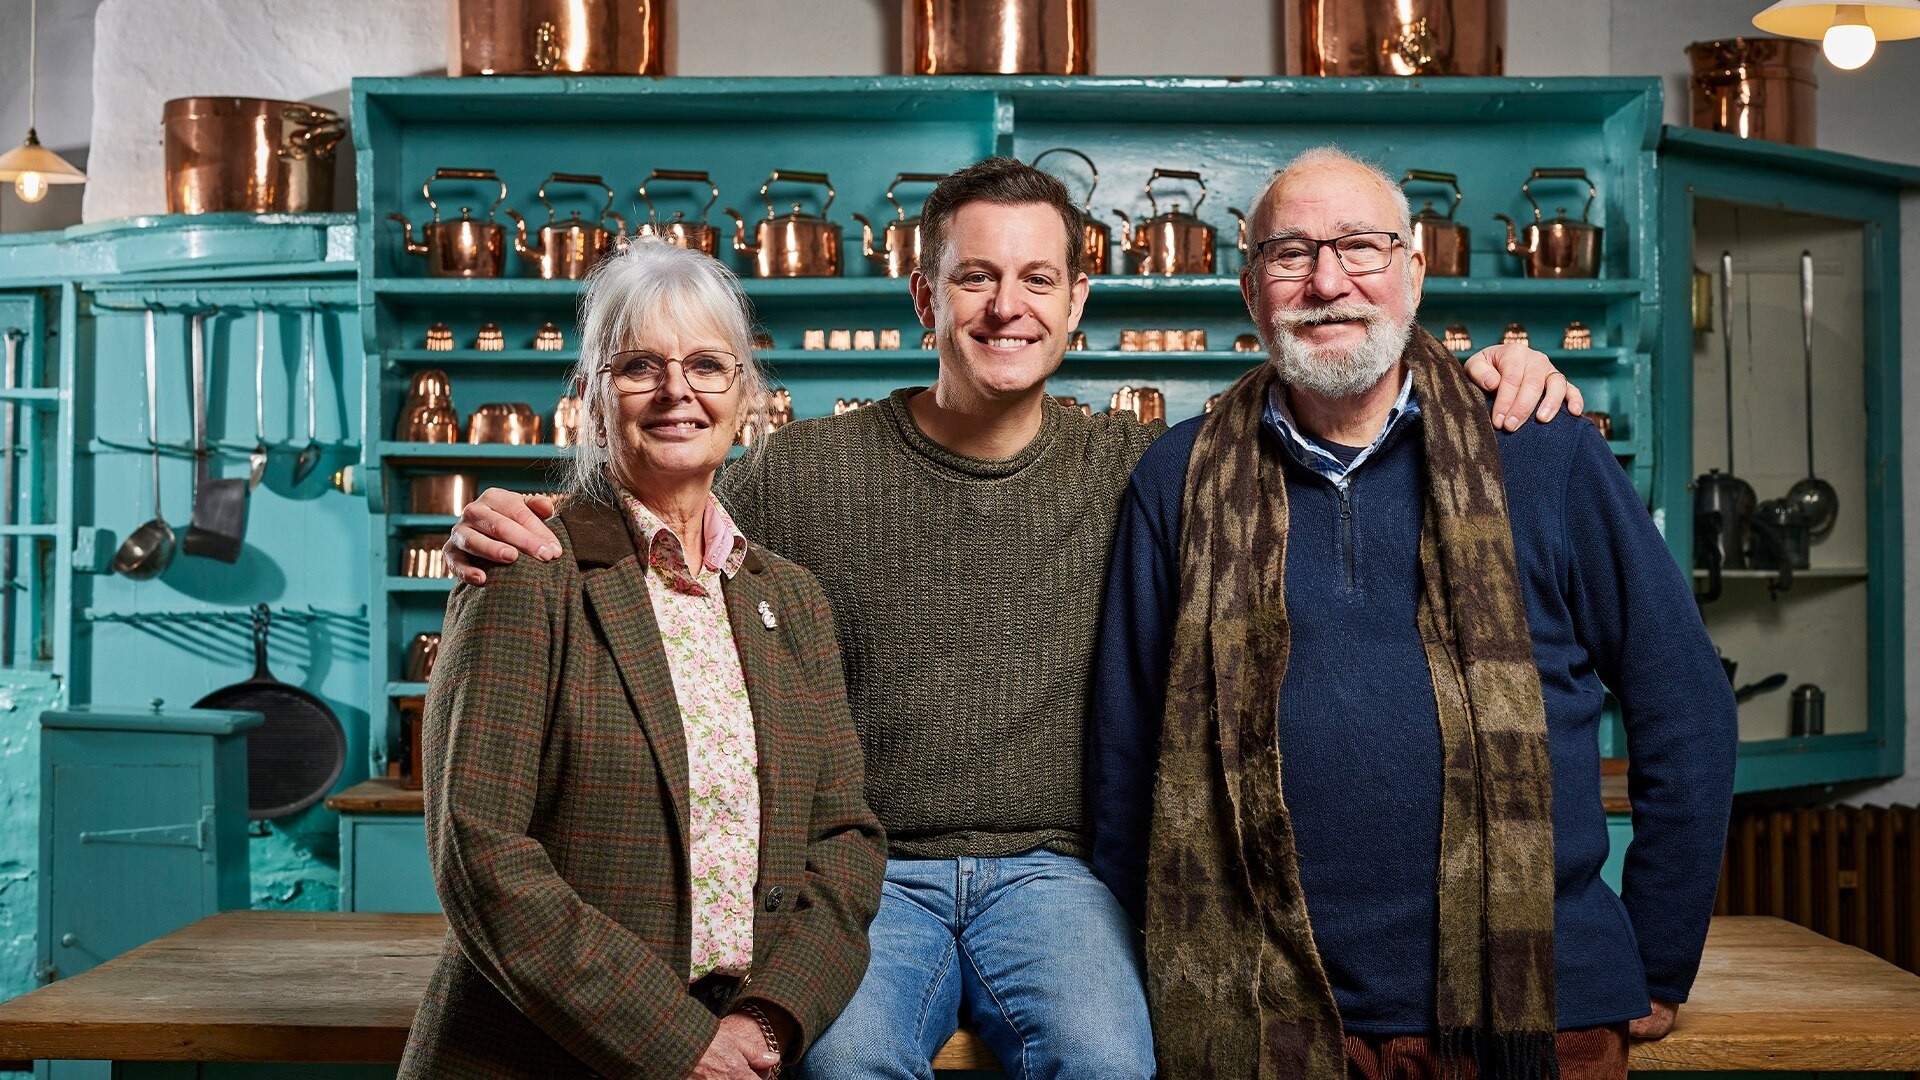 Matt Baker Christmas Travels with Mum and Dad - All 4